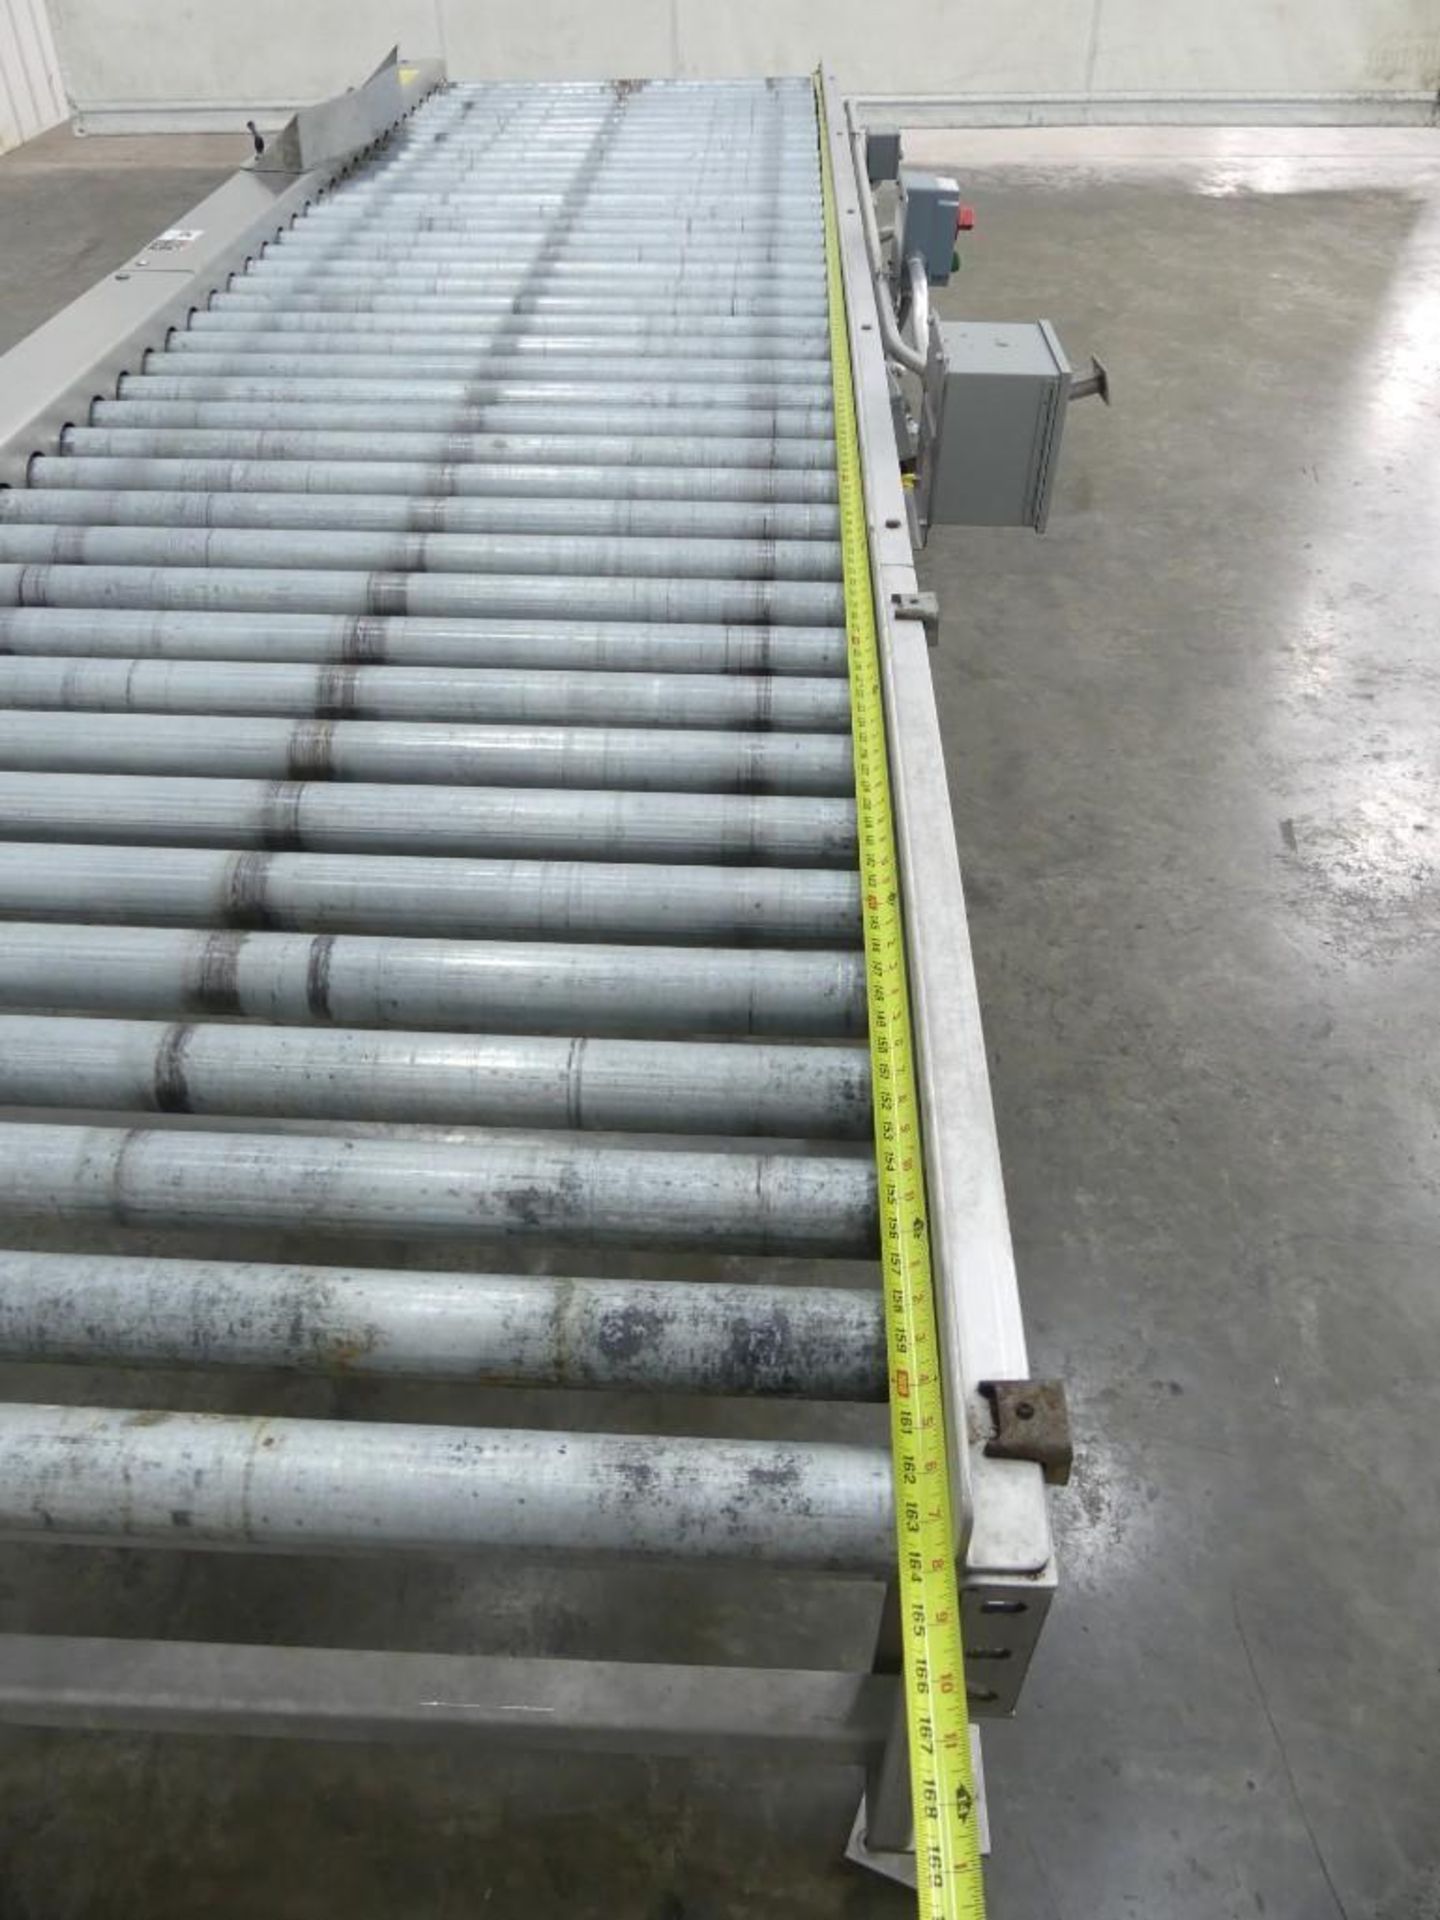 Prime Conveyor 164"L Roller Conveyor with Scale - Image 7 of 17